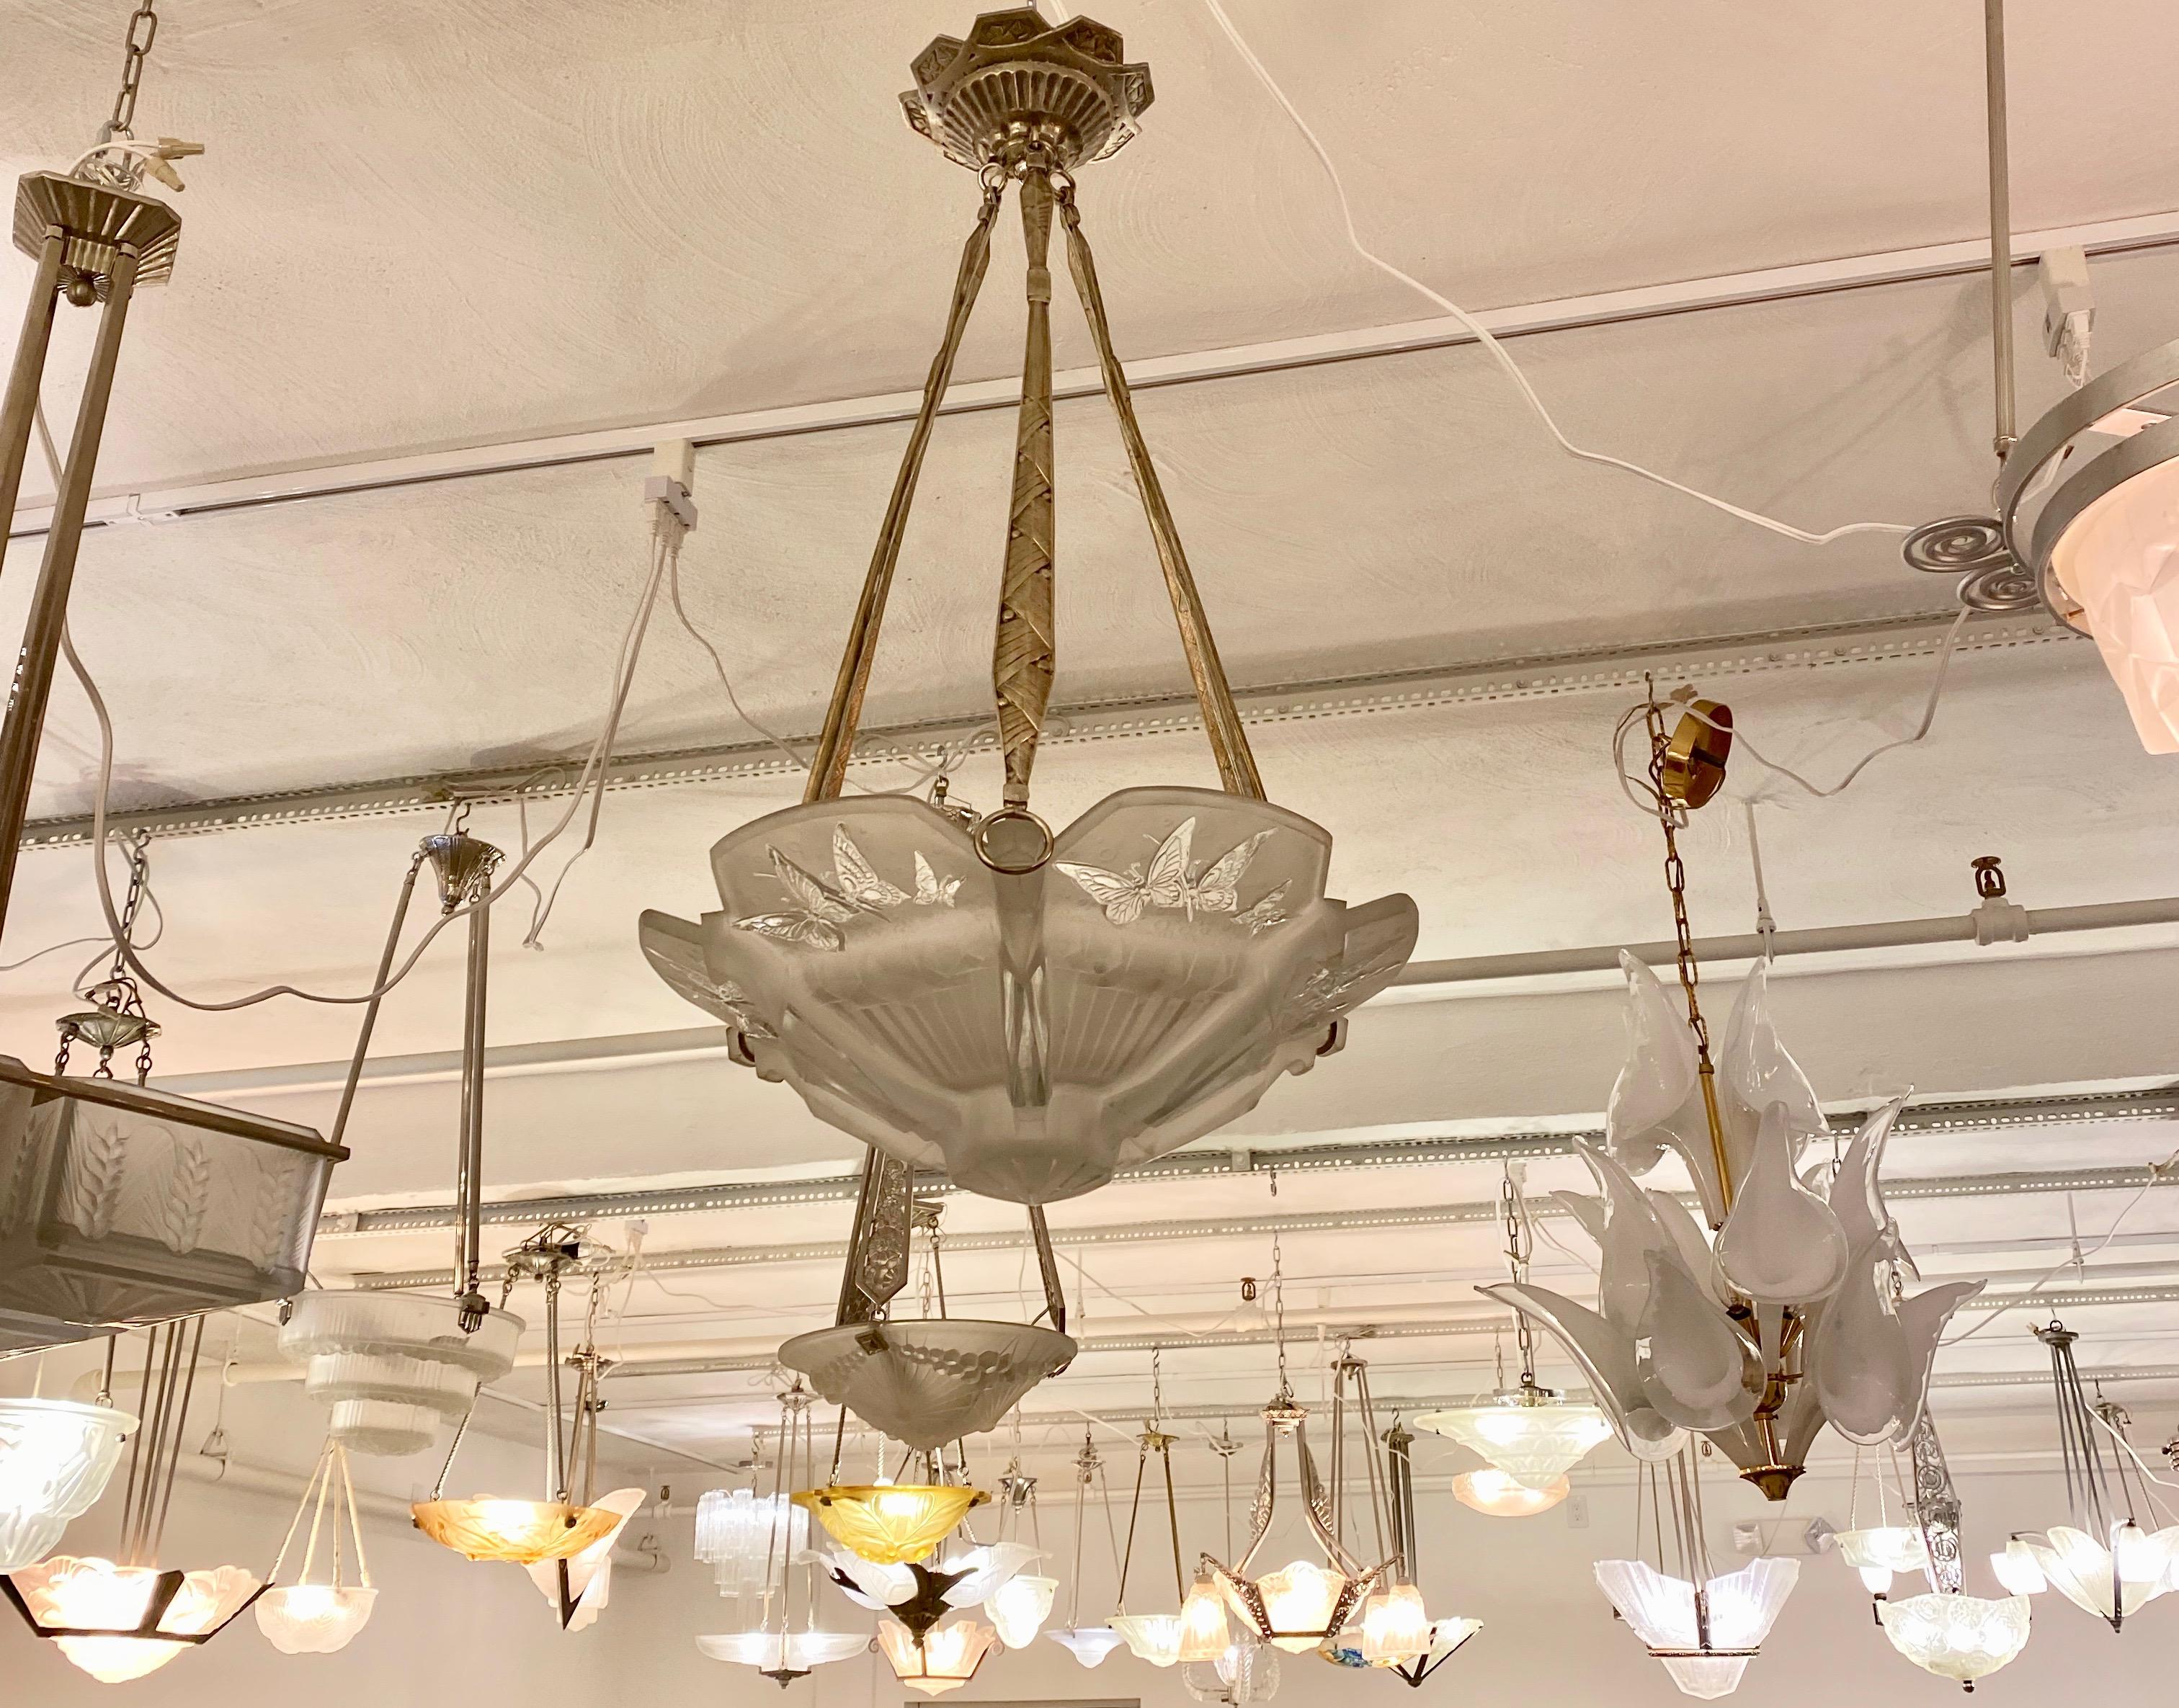 French Art Deco pendant chandelier signed by Muller Freres Luneville. Center glass bowl having geometric and butterfly motif throughout. Held by a matching nickel deco design frame with geometric motif that leads all the way to the ceiling plate.